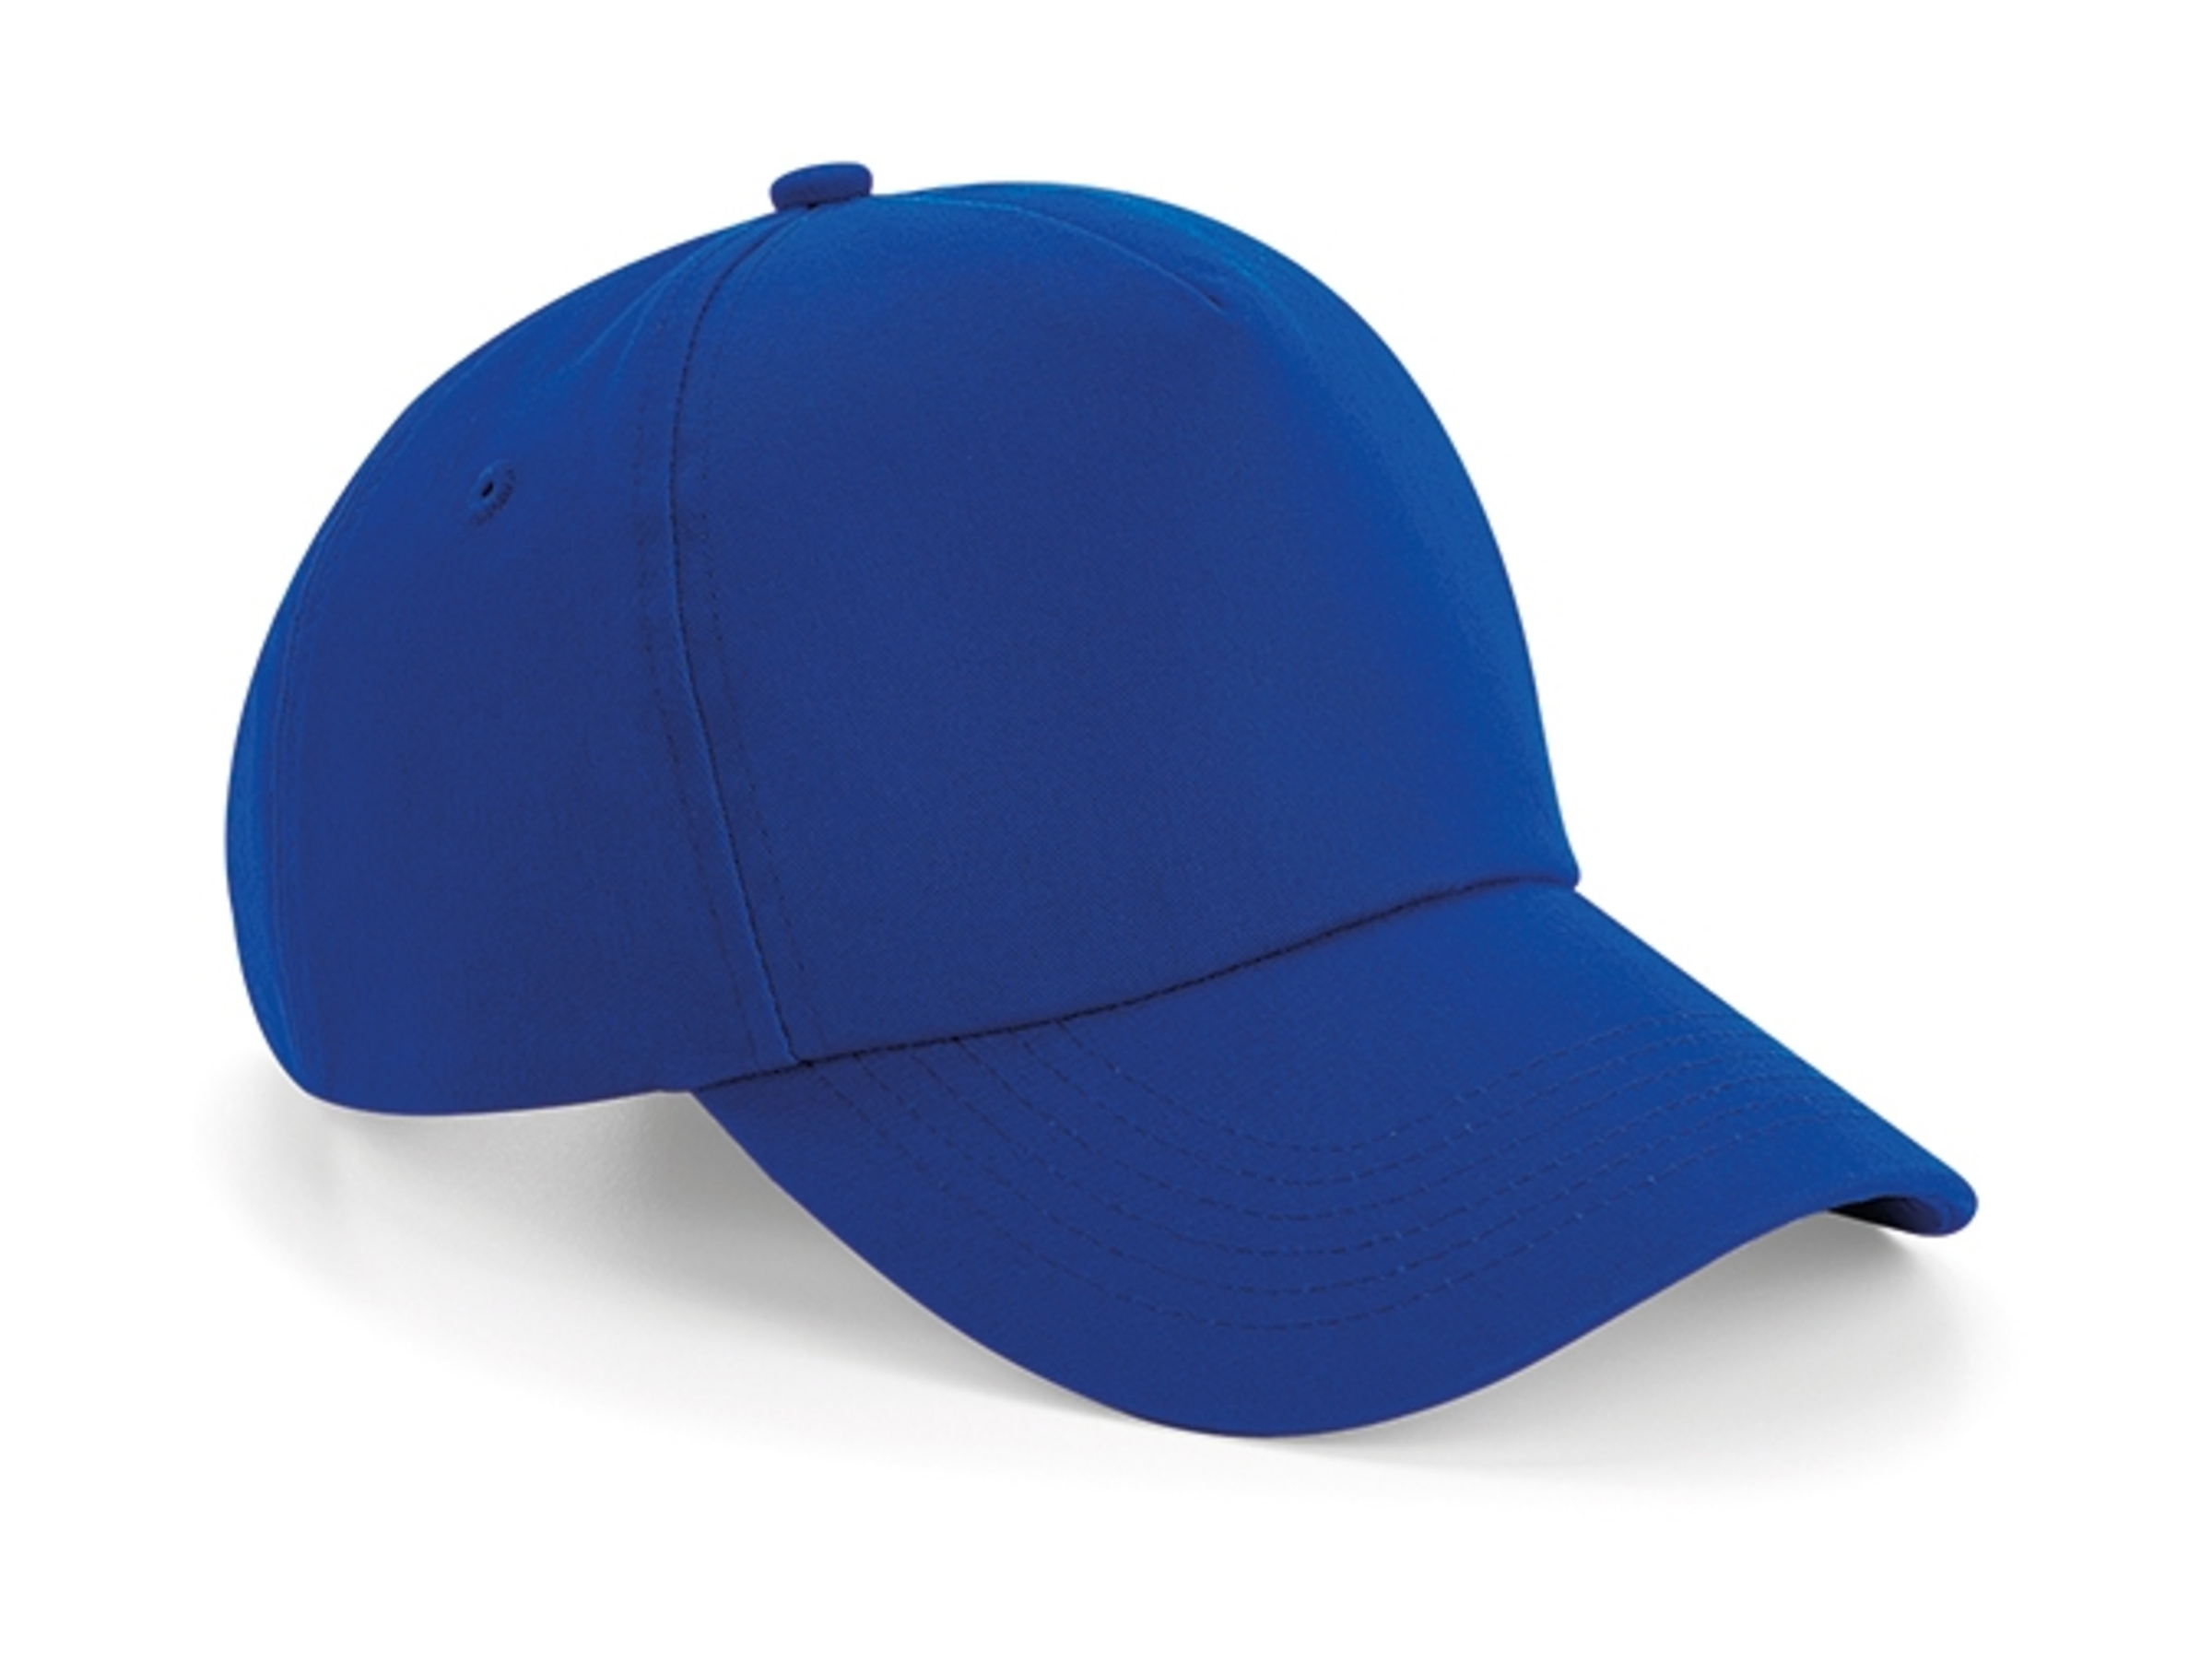 Beechfield Authentic 5 Panel Cap - Bright Royal - One Size